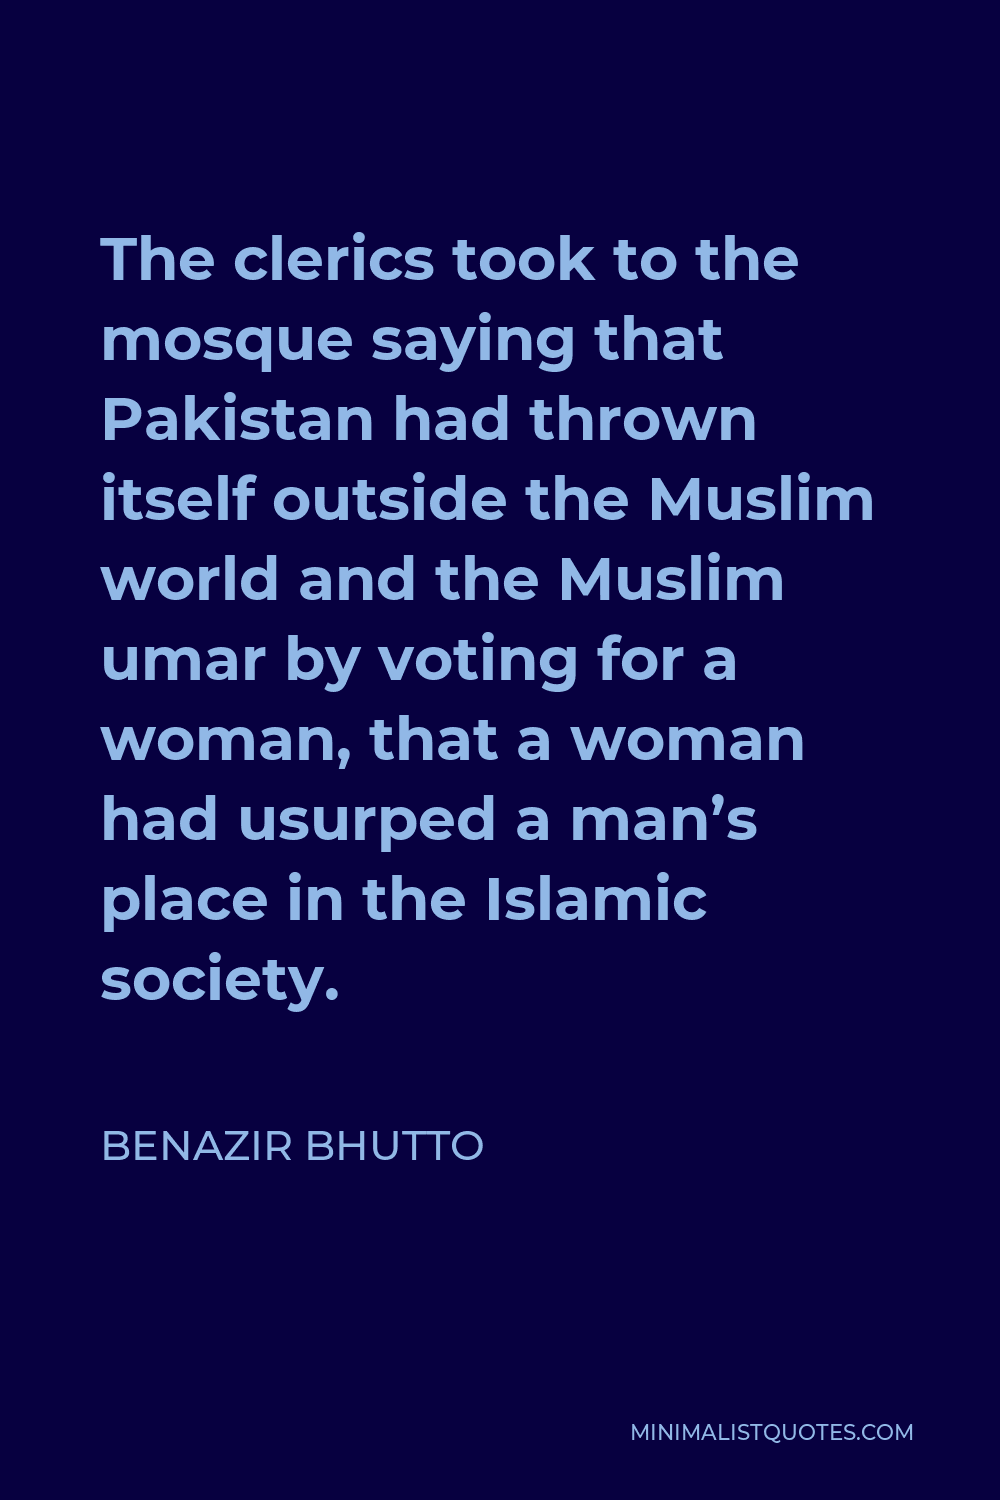 Benazir Bhutto Quote - The clerics took to the mosque saying that Pakistan had thrown itself outside the Muslim world and the Muslim umar by voting for a woman, that a woman had usurped a man’s place in the Islamic society.